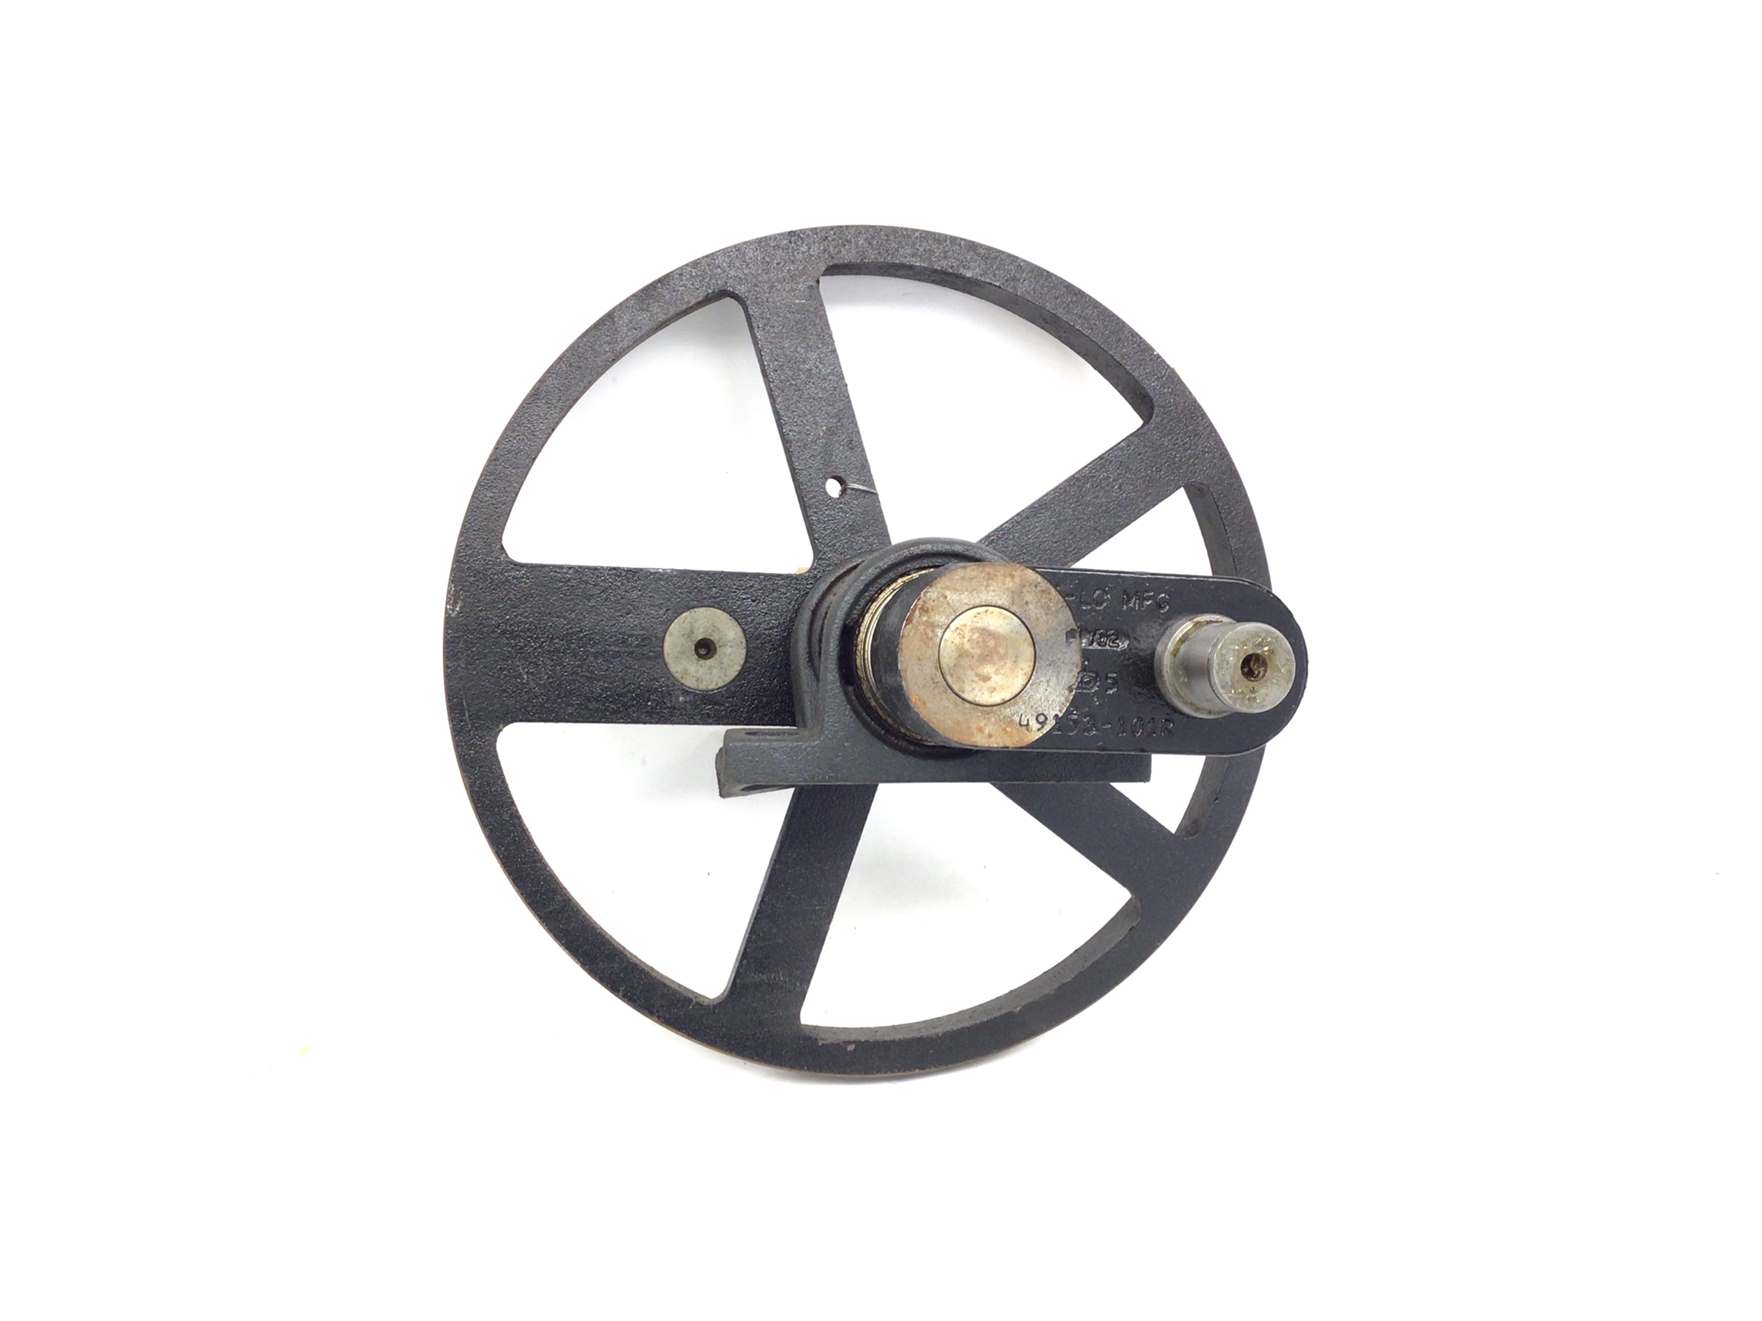 Input Pulley With 49153-101 Crank Arm (Used)